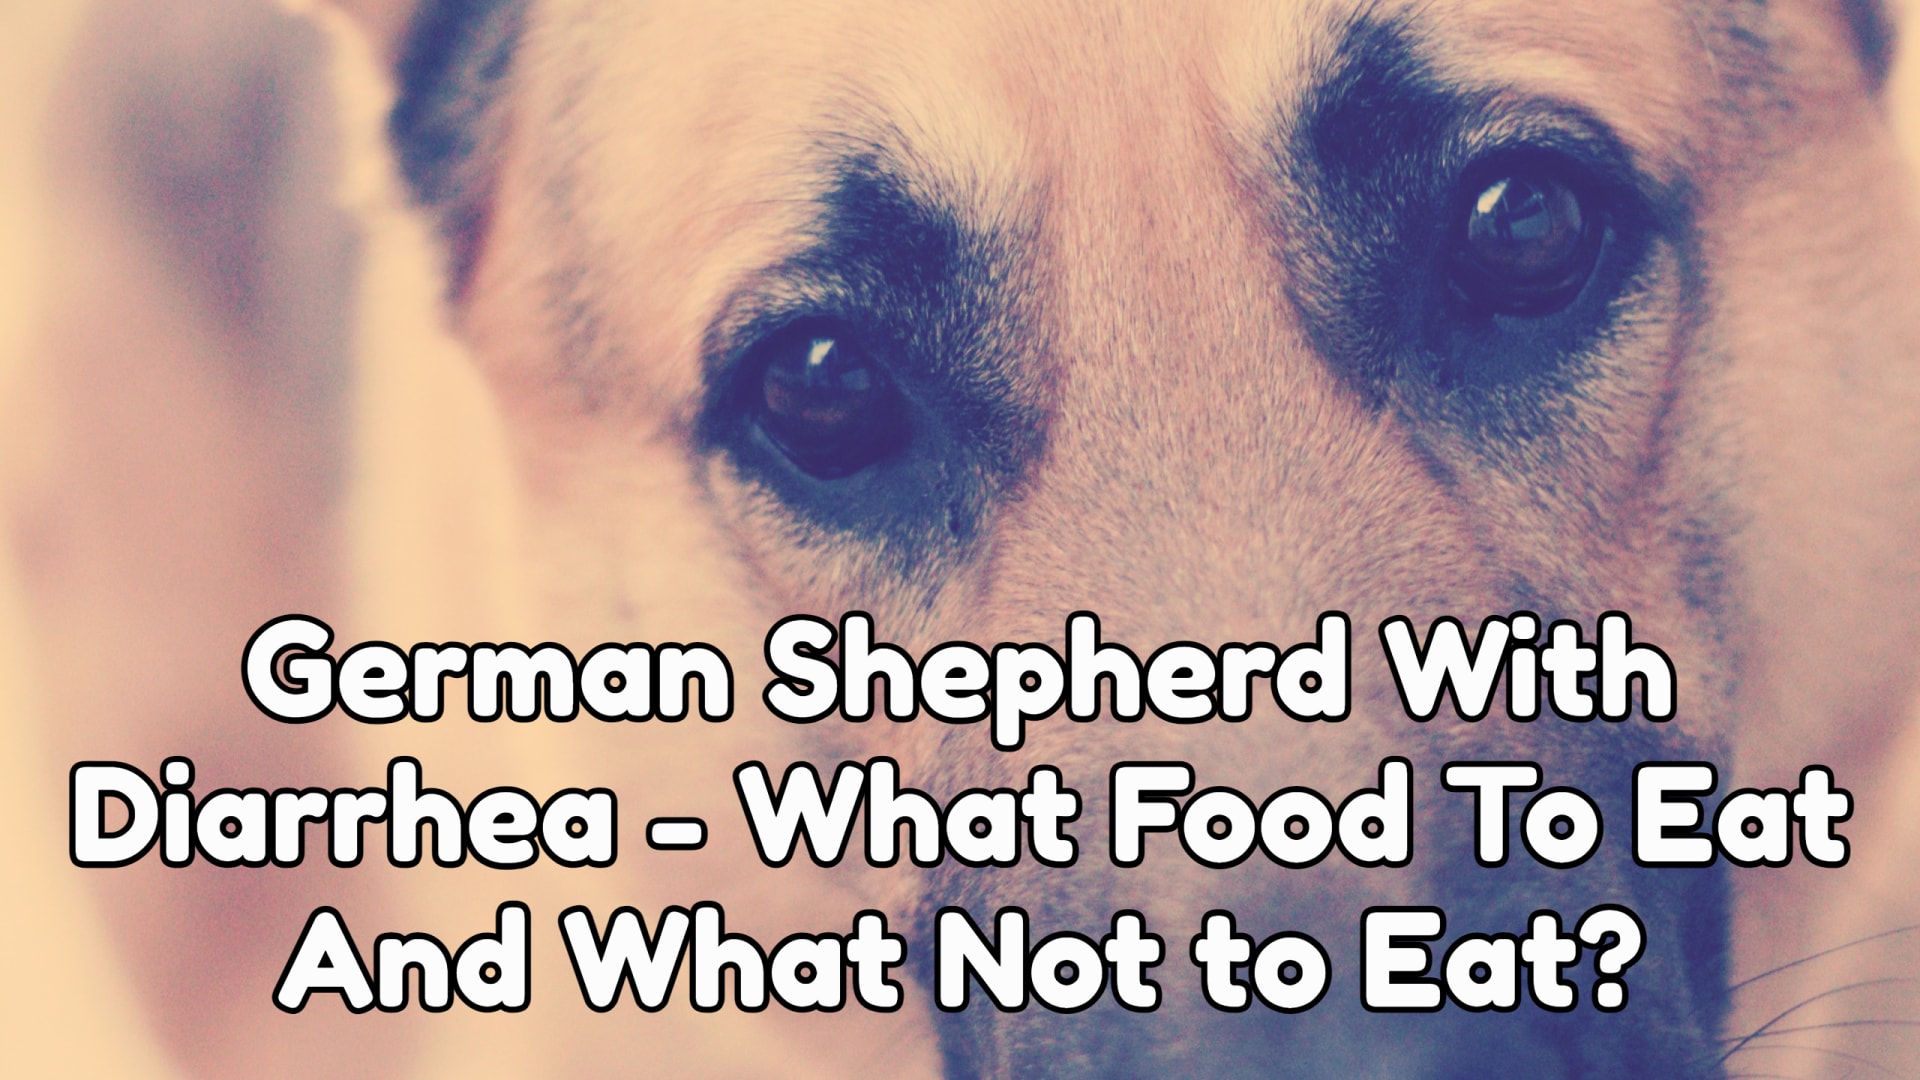 German Shepherd With Diarrhea - What Food To Eat And What Not To Eat?